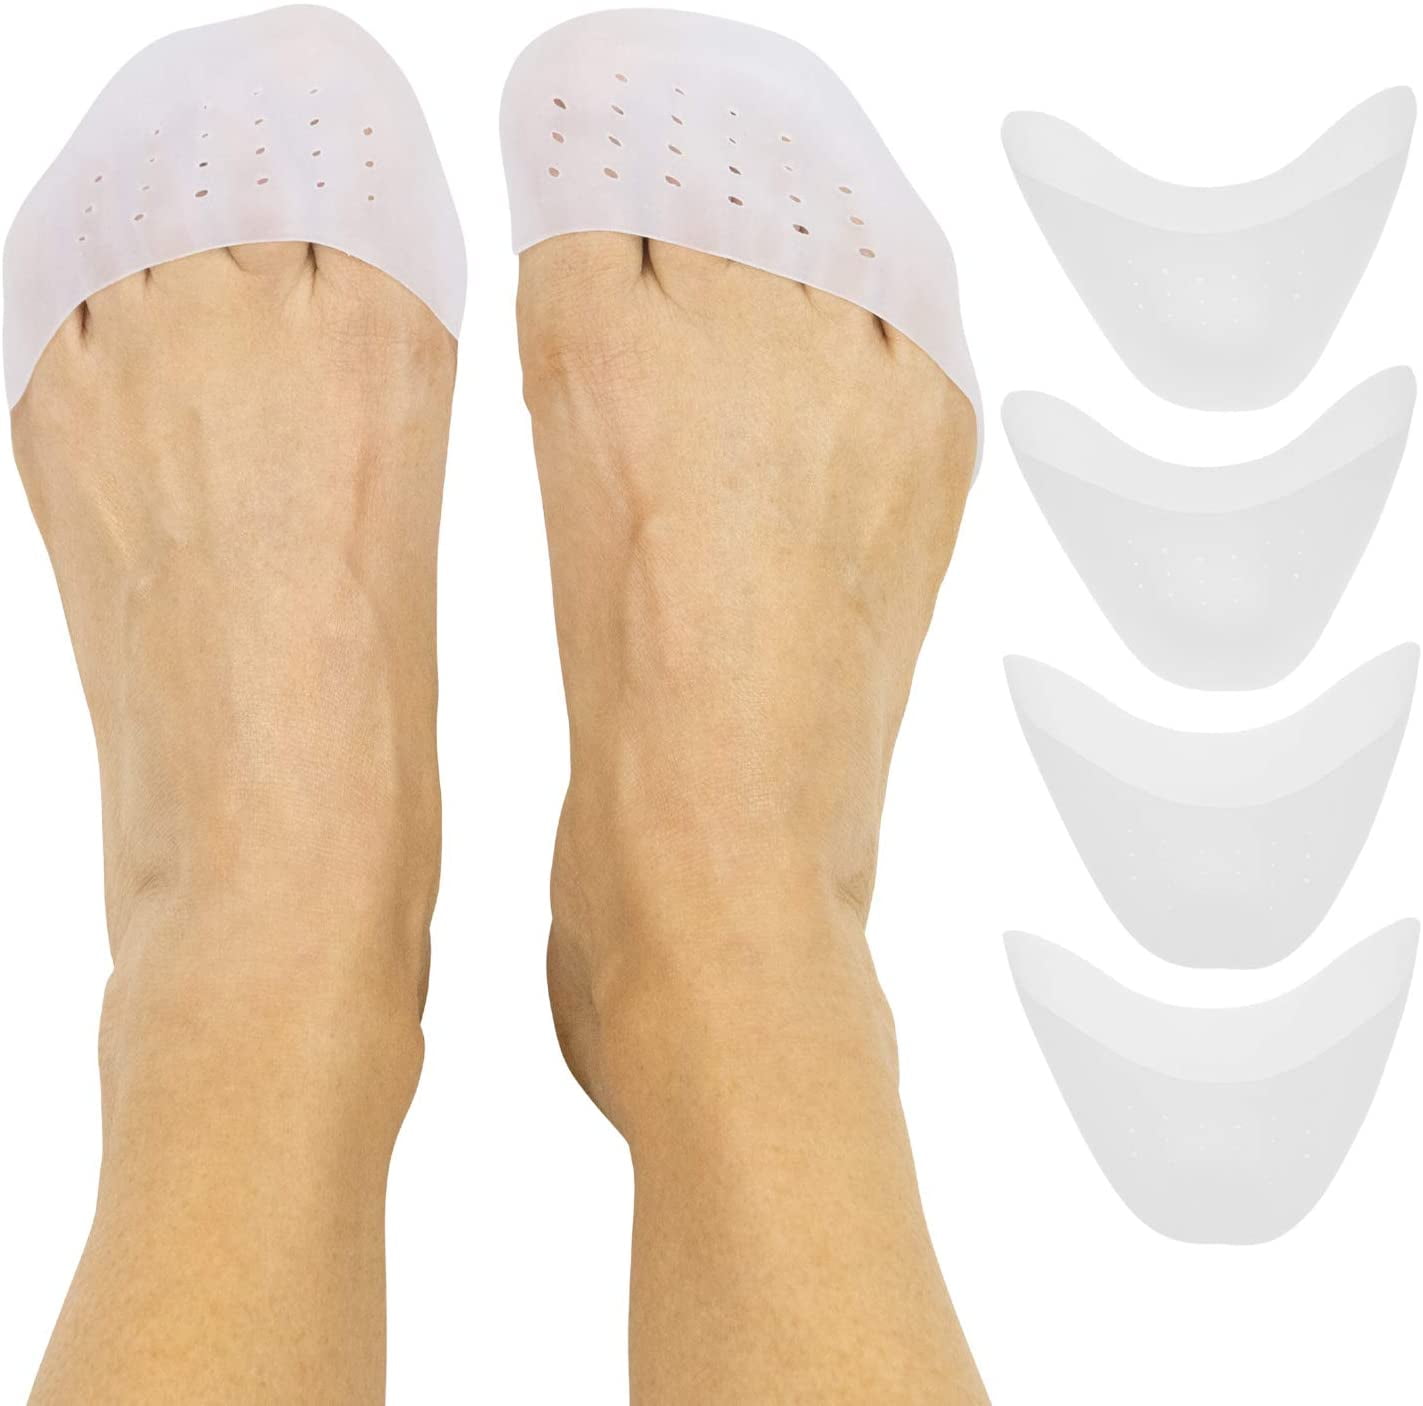 Hiking Silicone Gel Toe Caps Scoolr Gel Half Full Toe Caps Cover Protector for Women Soft Ballet Pointe Dance Athlete Shoe Toe Pads Toe Protector with Breathable Hole for Walking 